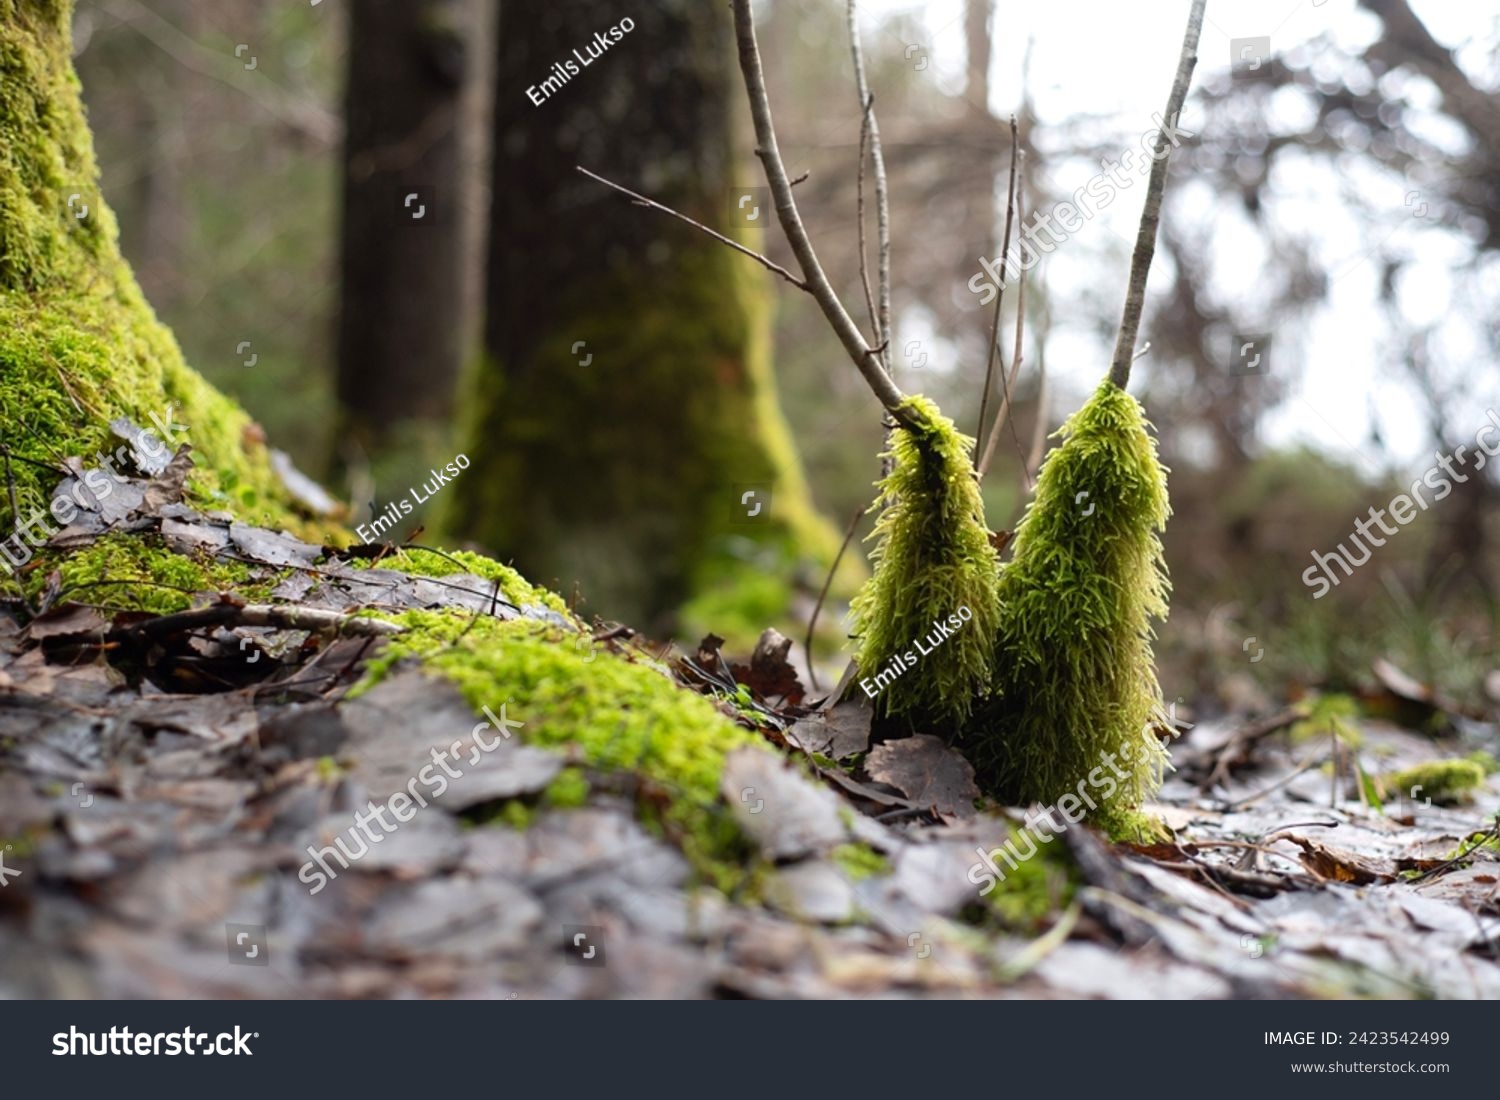 Green moss in the forest. Stock Photo. Moss overgrown forrest in spring time. Swampy picture with old tree trunks overgrown with green moss, swampy forest landscape. #2423542499